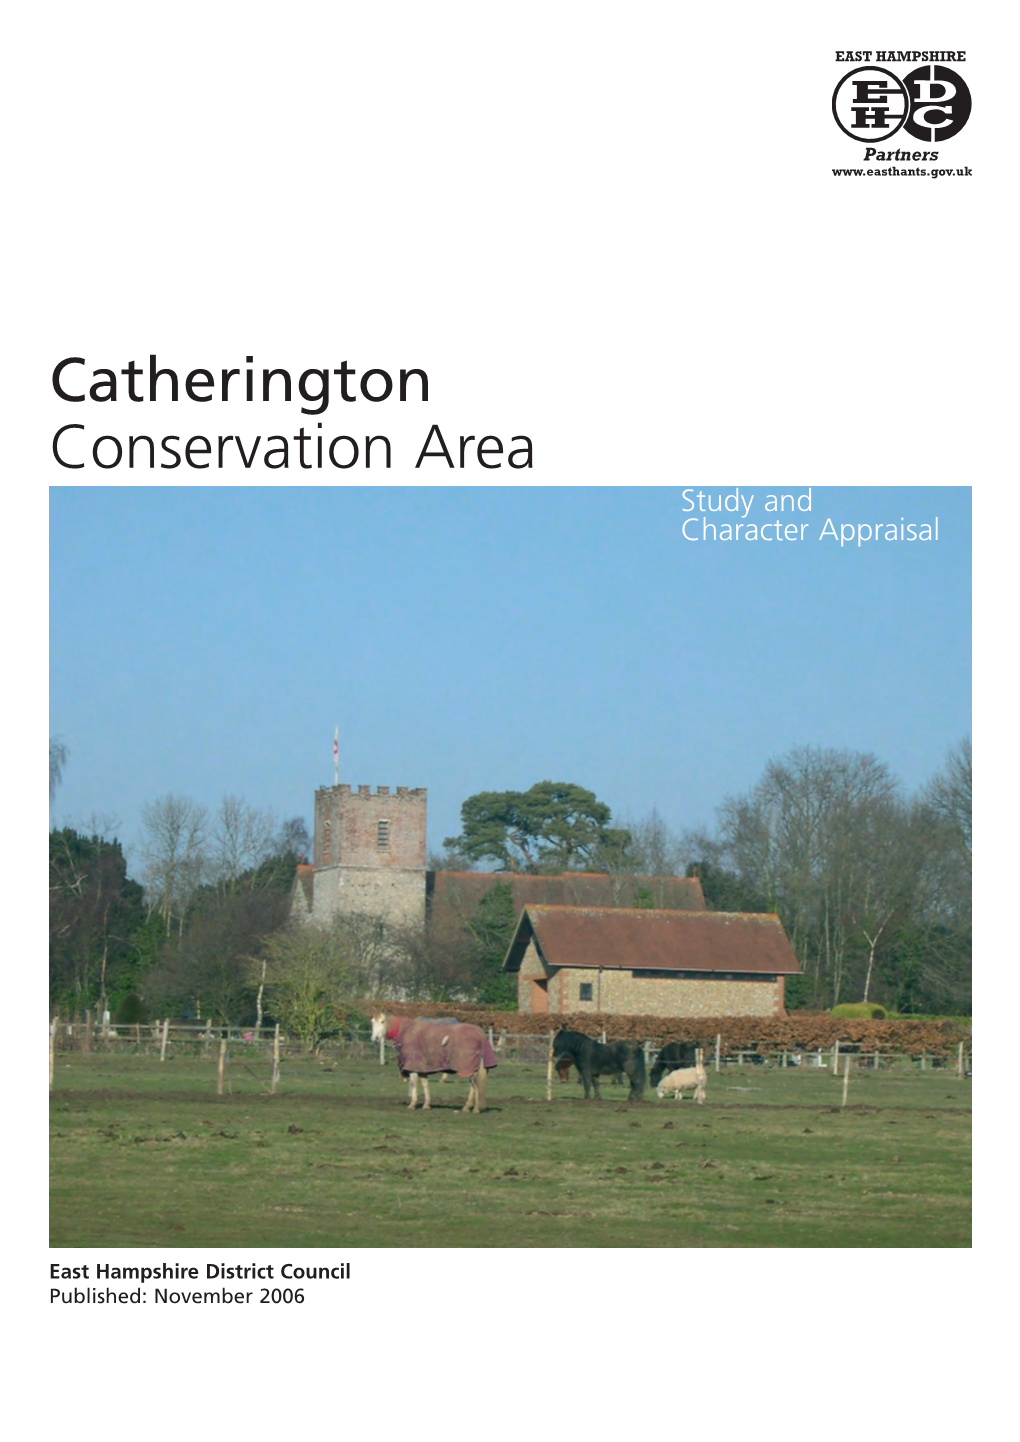 Catherington Conservation Area Study and Character Appraisal